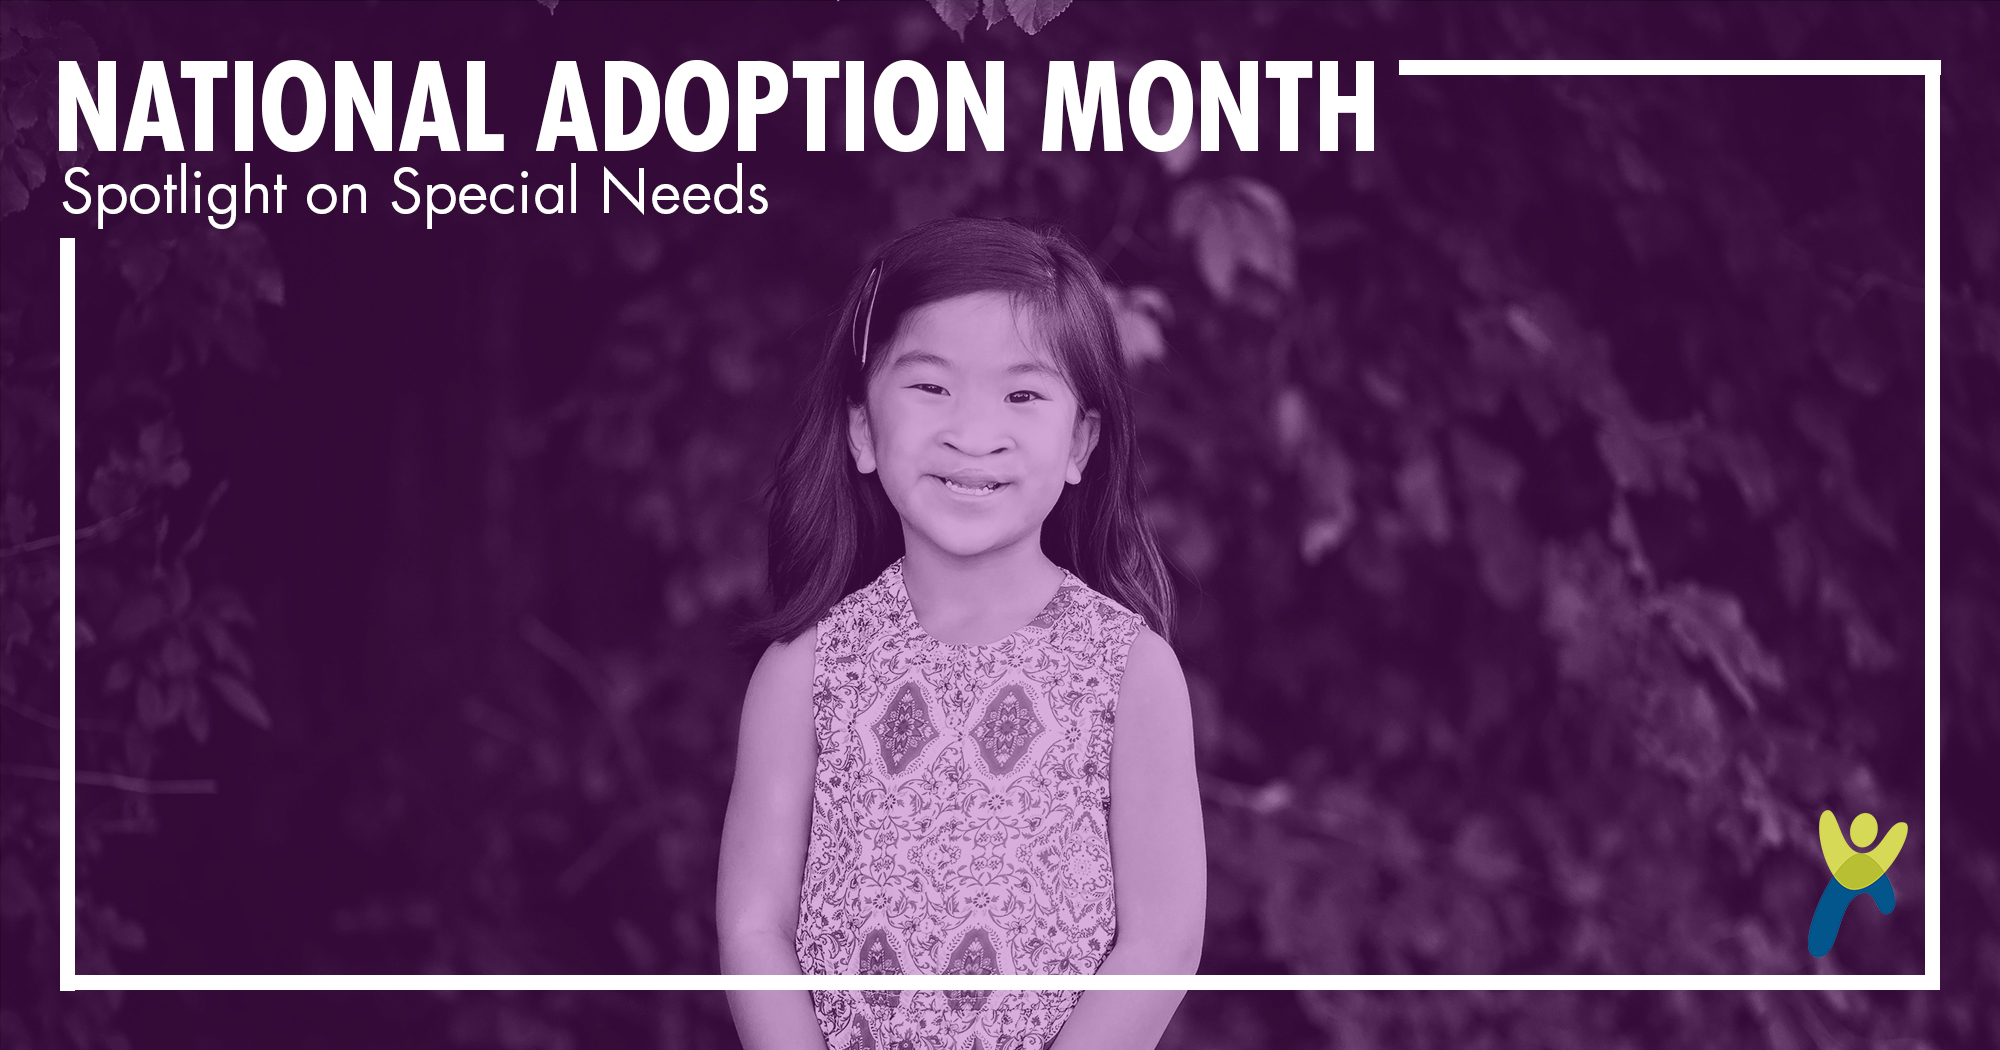 Photo of an adopted child with a cleft lip and palate for national adoption month and the spotlight on special needs.